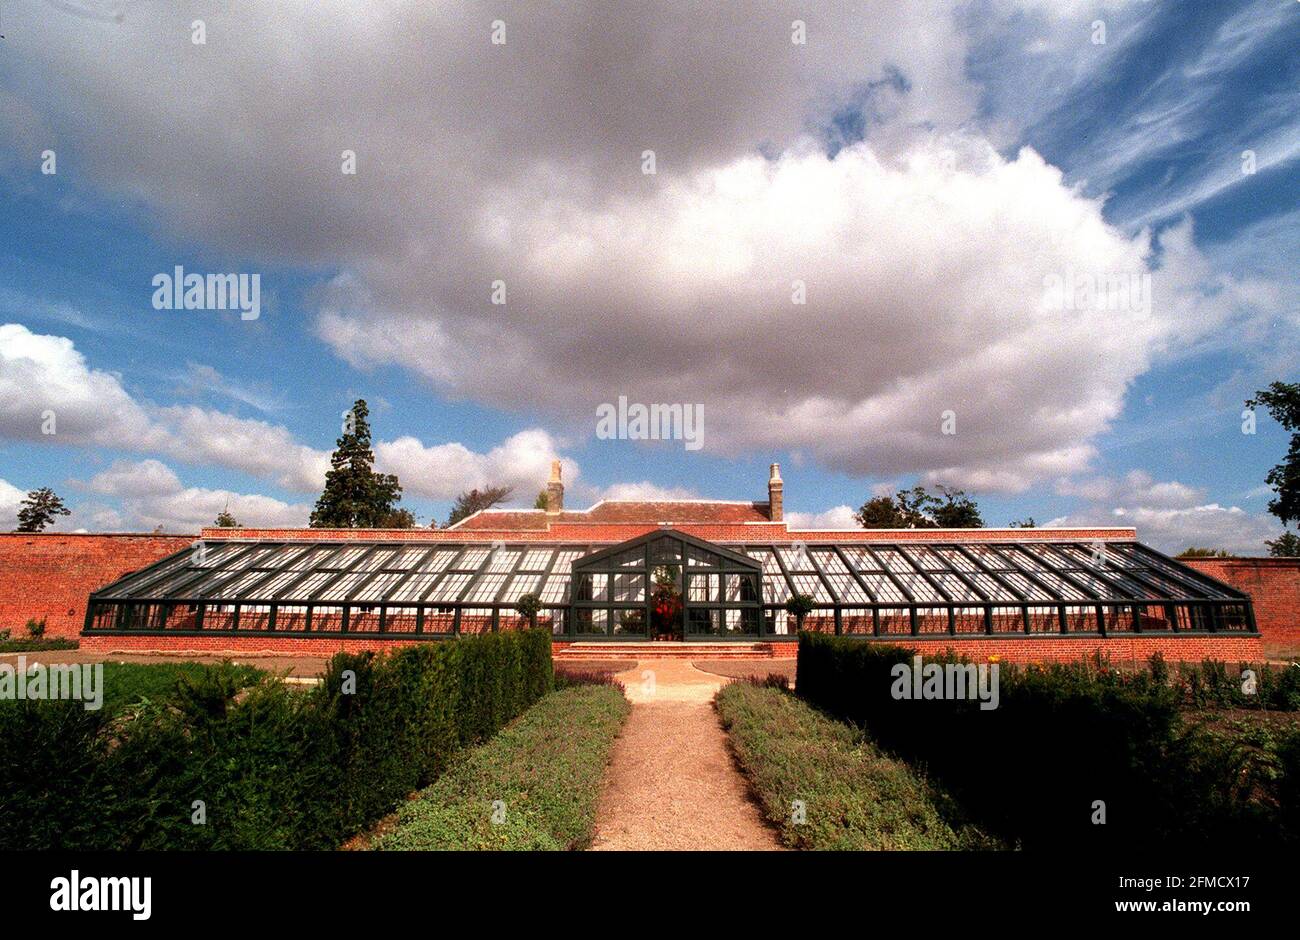 The National Trust has just completed a restoration Sep 2000of the walled garden at Wimpole Hall, including re-building the glasshousesto the original design of the 18th century architect Sir John Soane, they were destroyed by a German bomb in World War Two Stock Photo